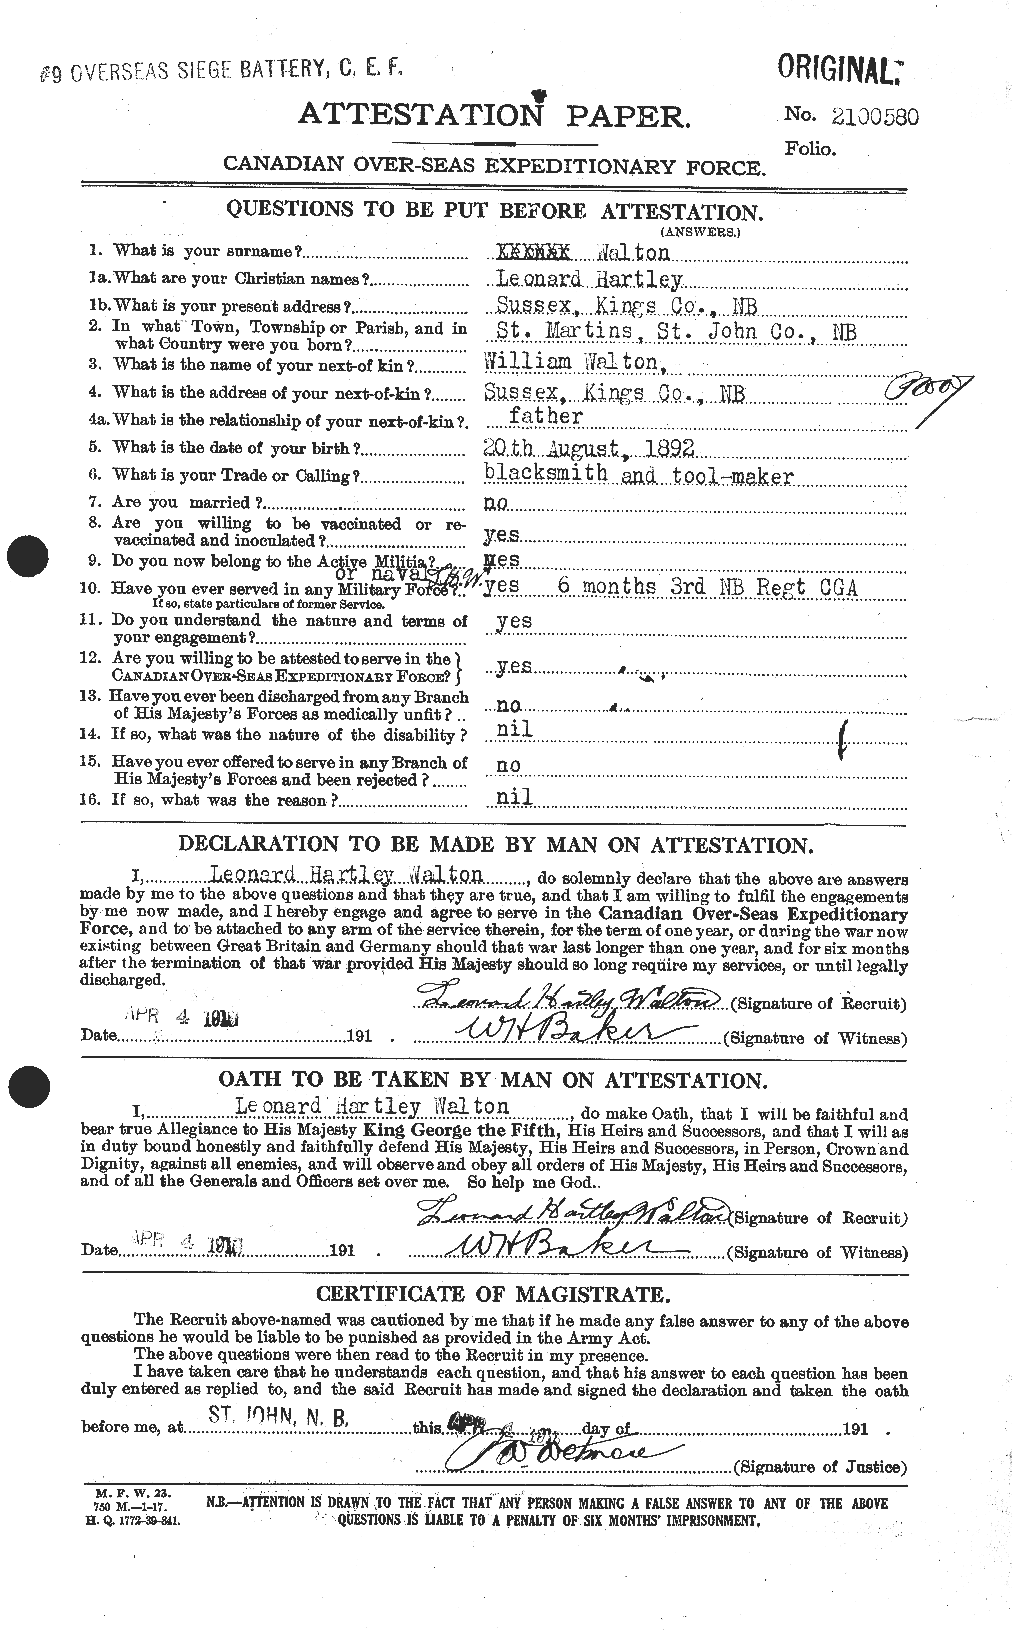 Personnel Records of the First World War - CEF 656876a